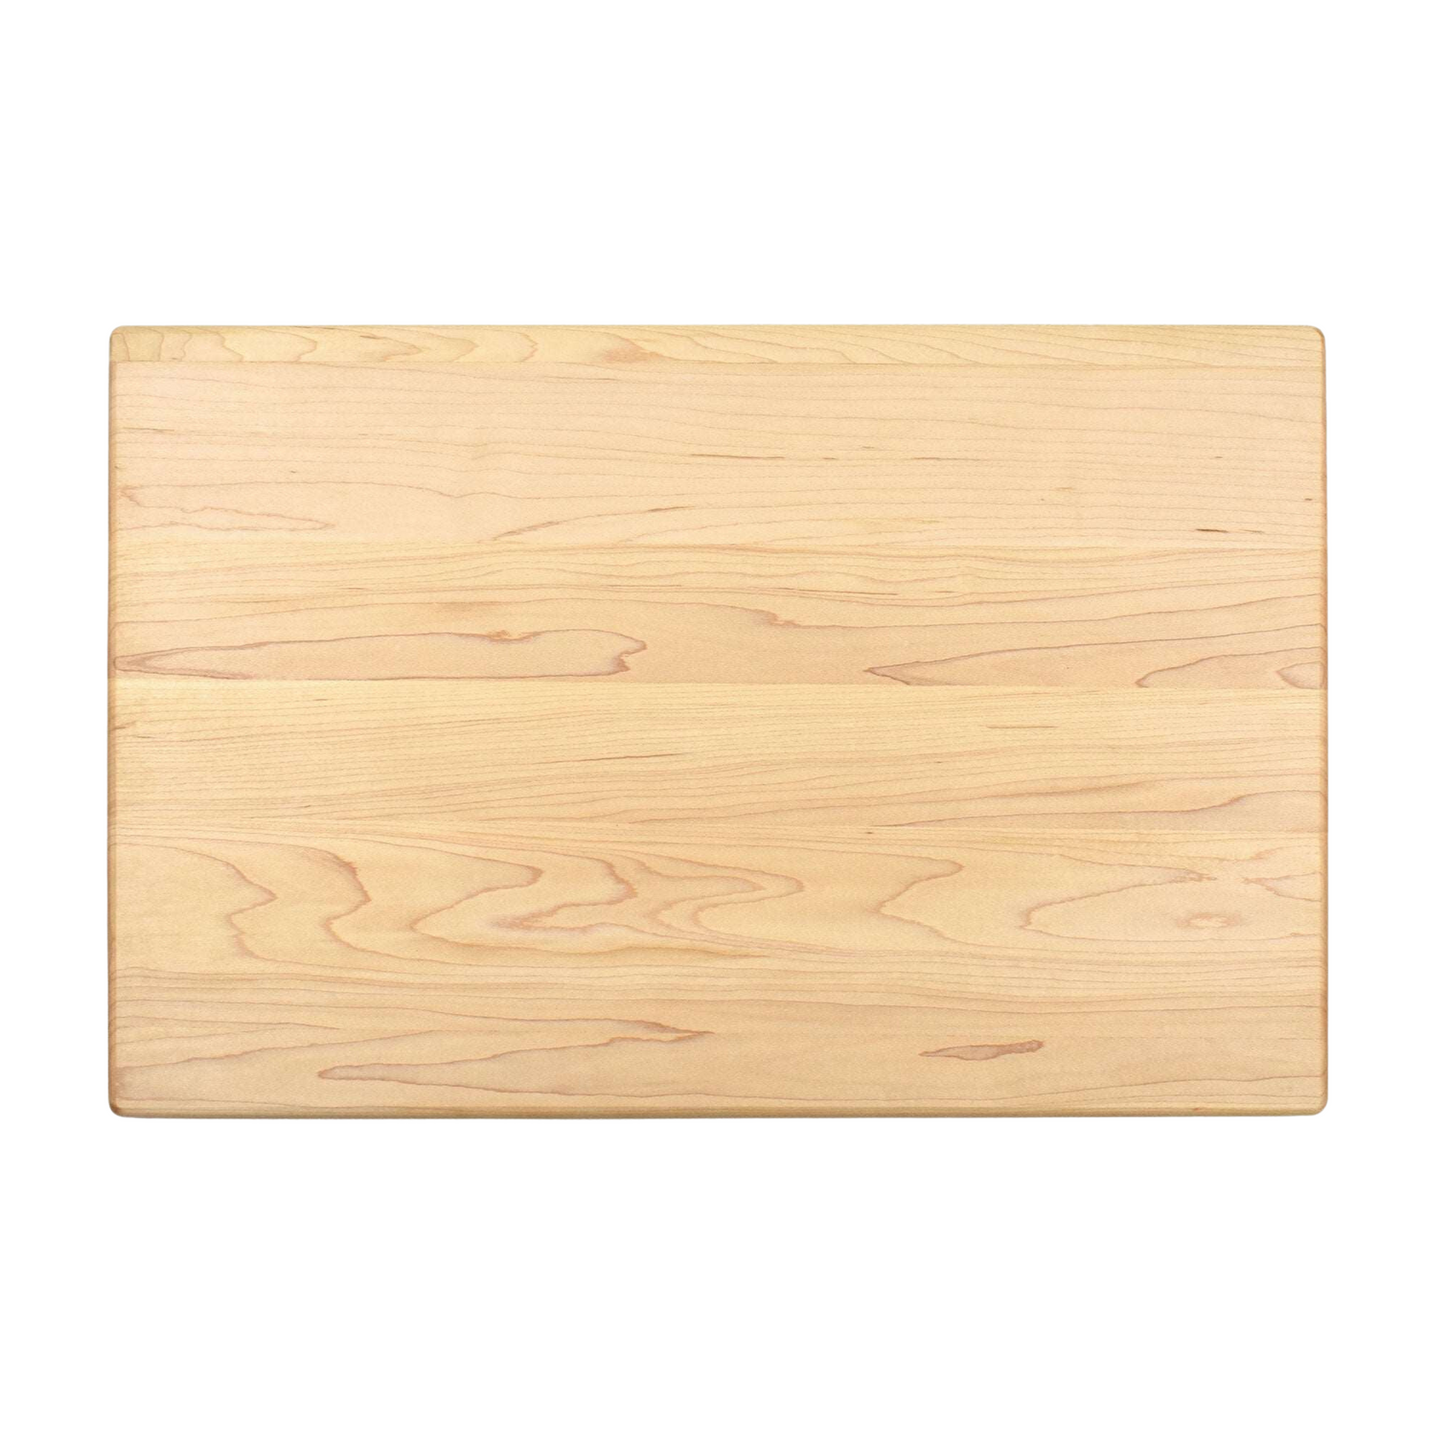 Original Off Road Vehicles Cutting Board - Premium Cutting Boards from Hipster Lasers - Just $90! Shop now at Hipster Lasers